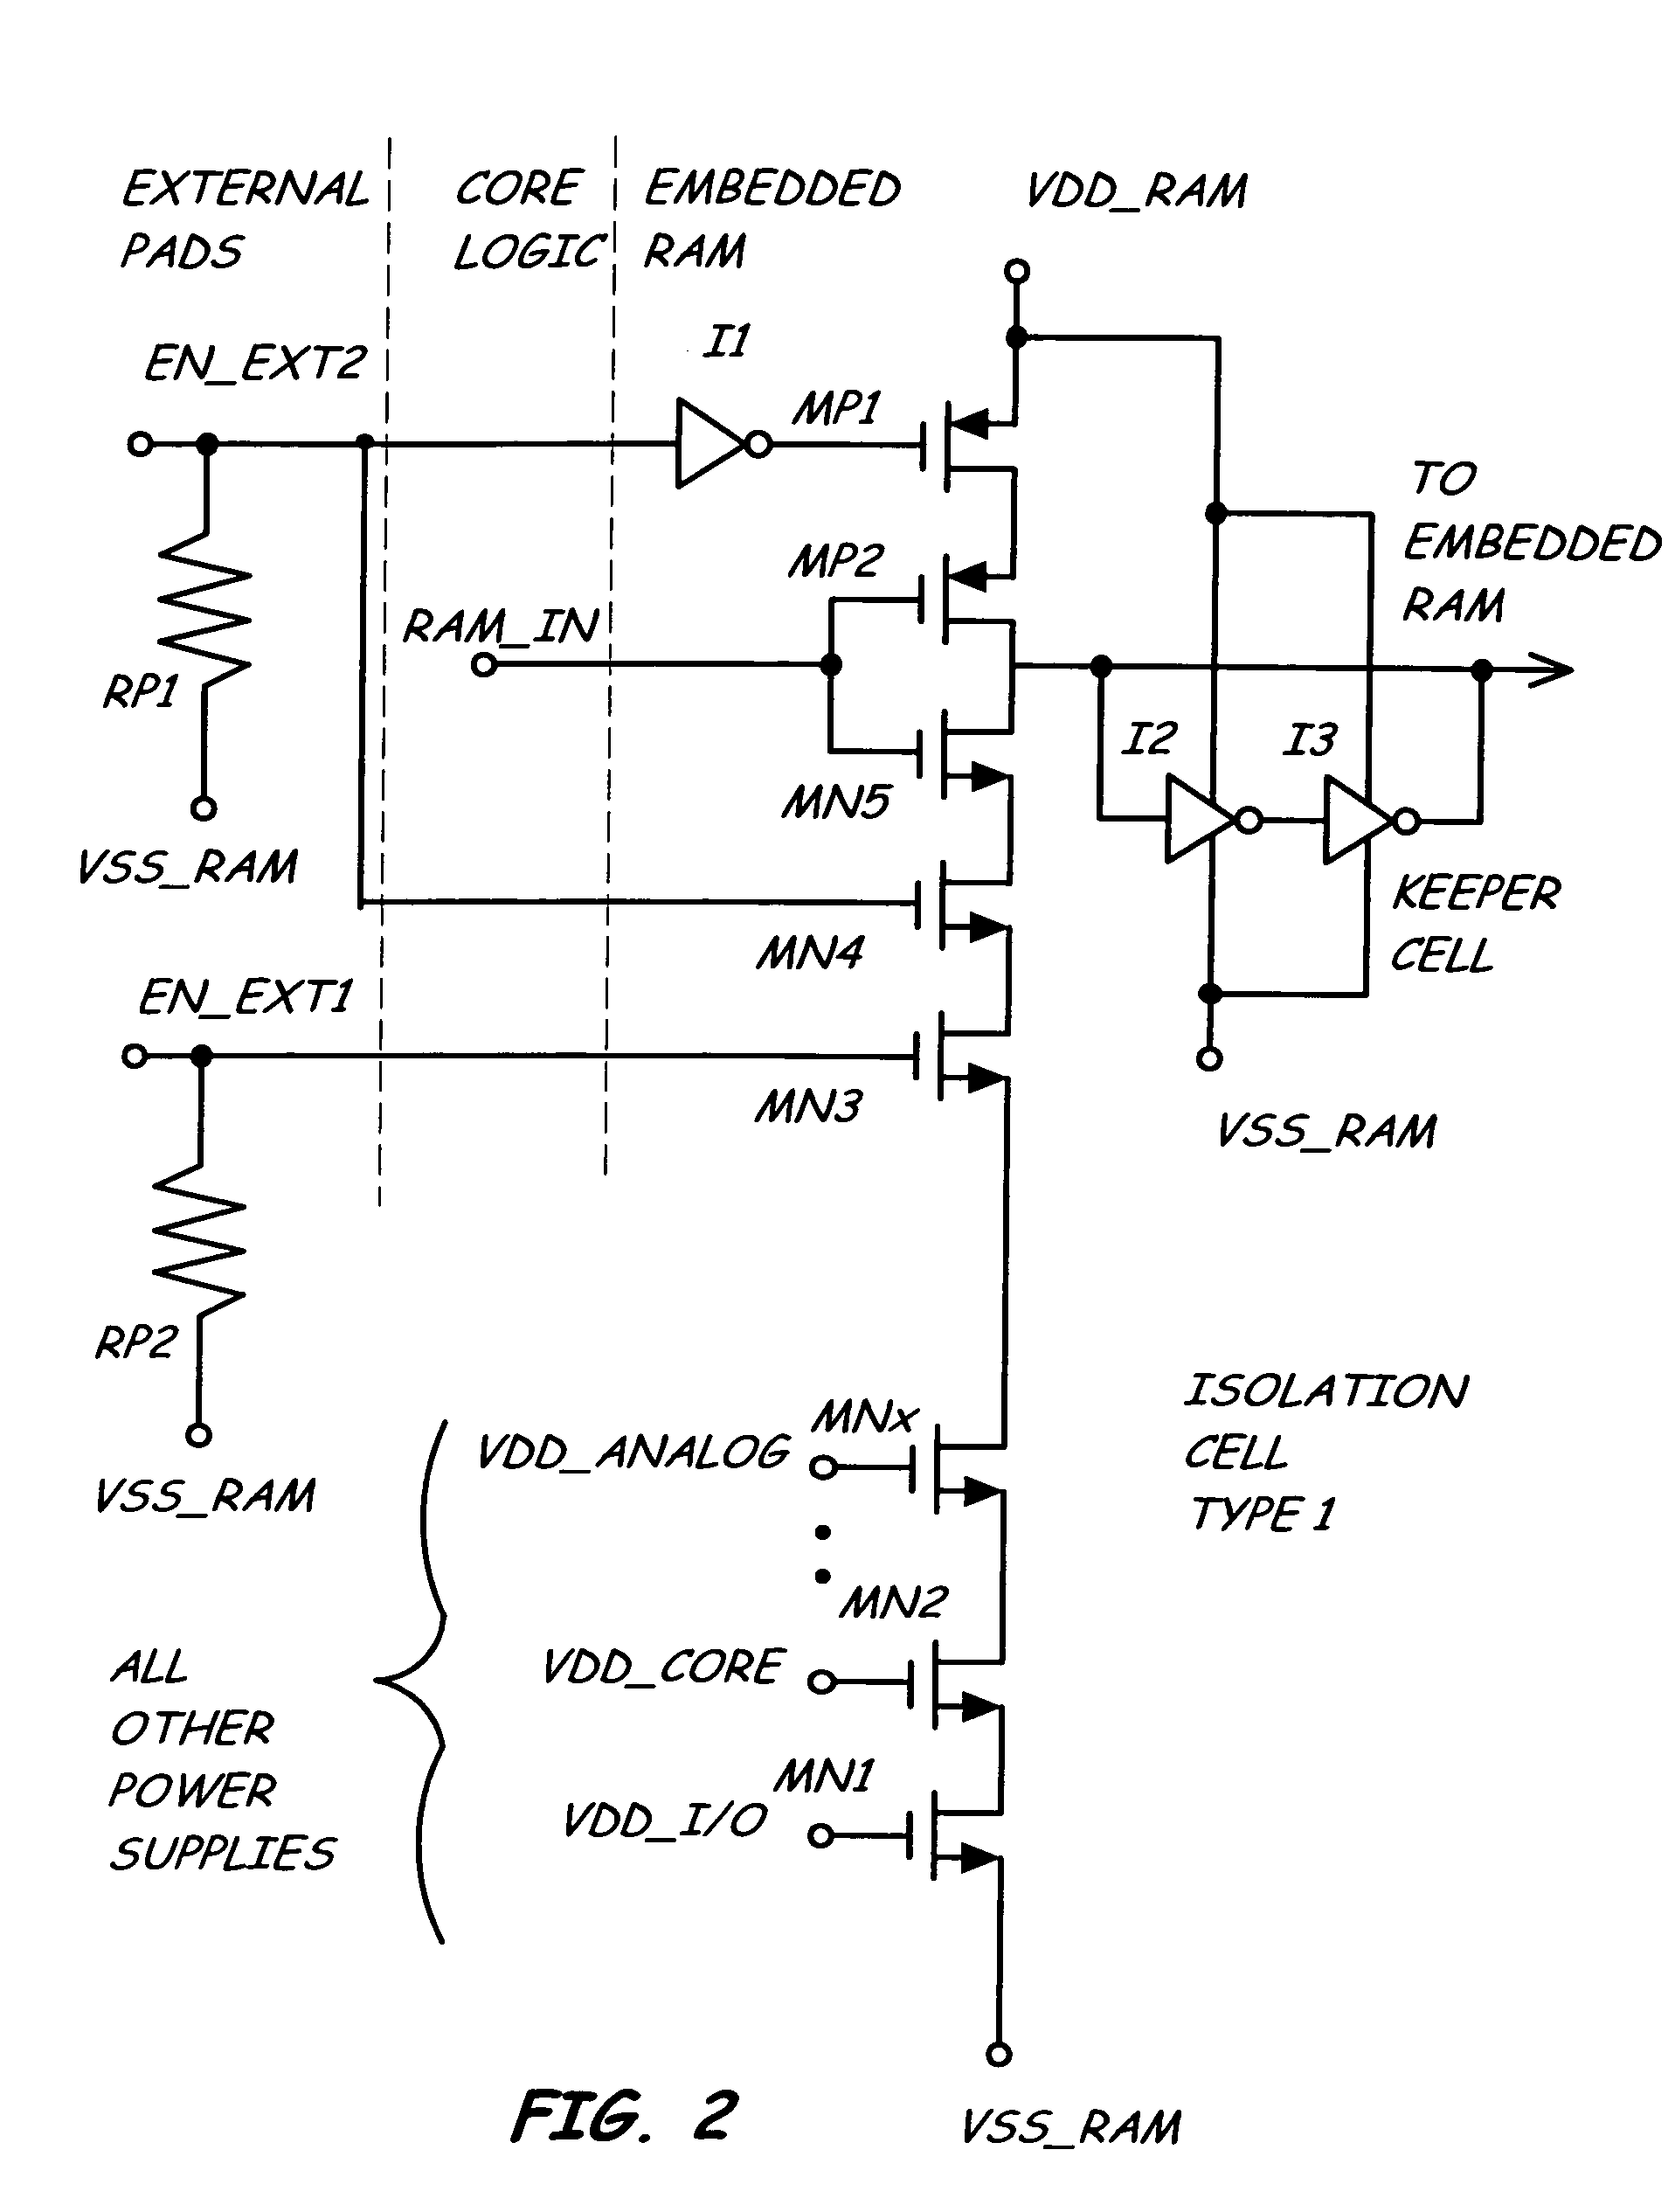 CMOS isolation cell for embedded memory in power failure environments